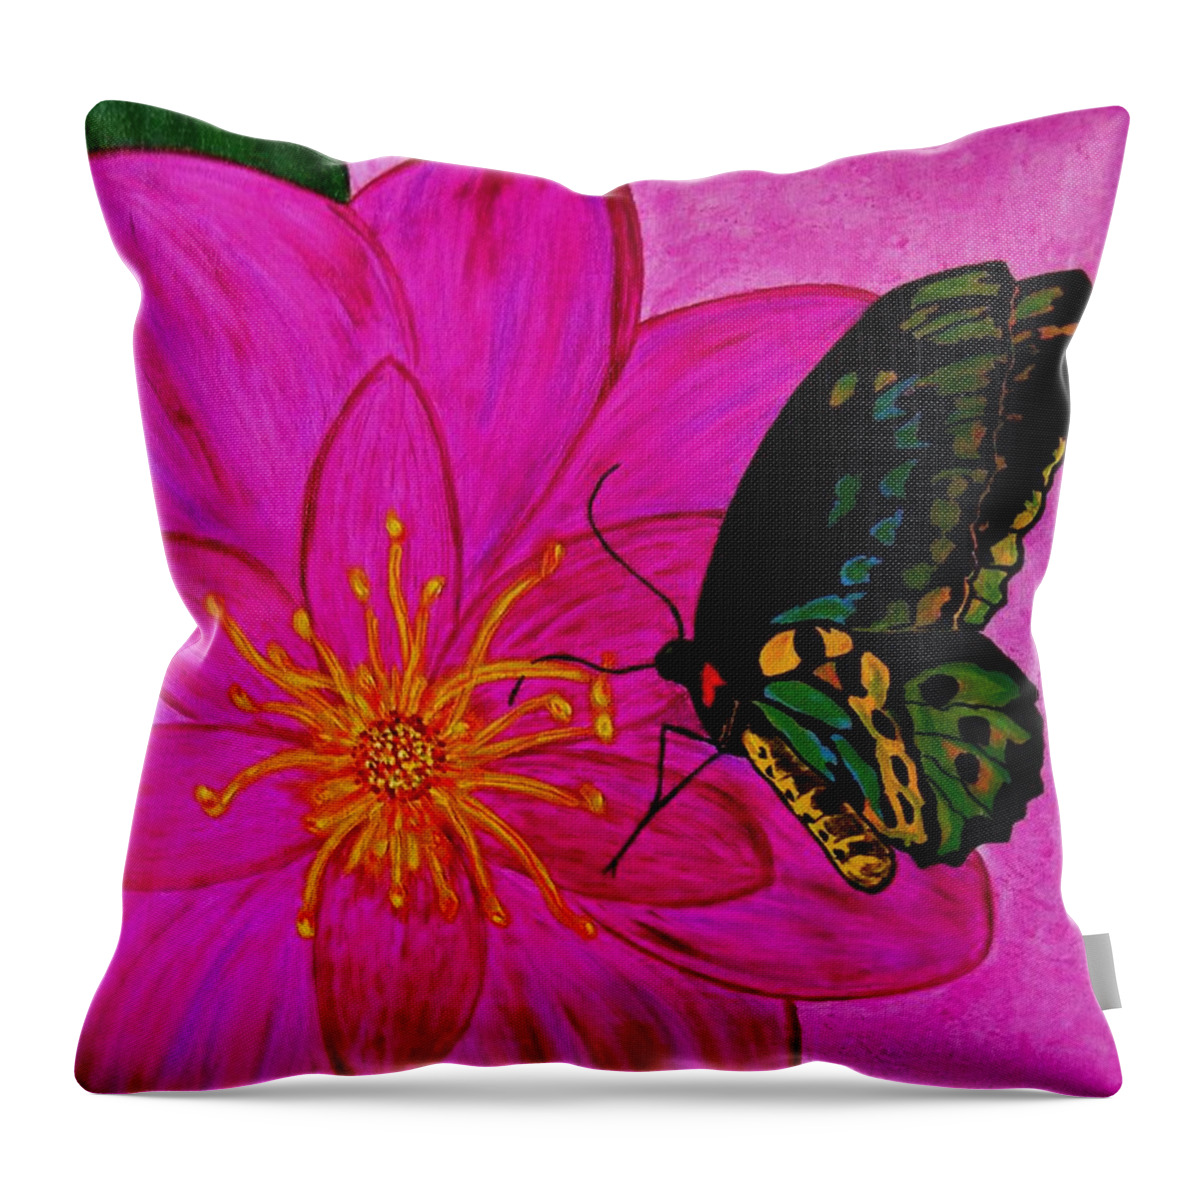 Pink Flower Art Prints Throw Pillow featuring the painting Center Of Attraction by Celeste Manning